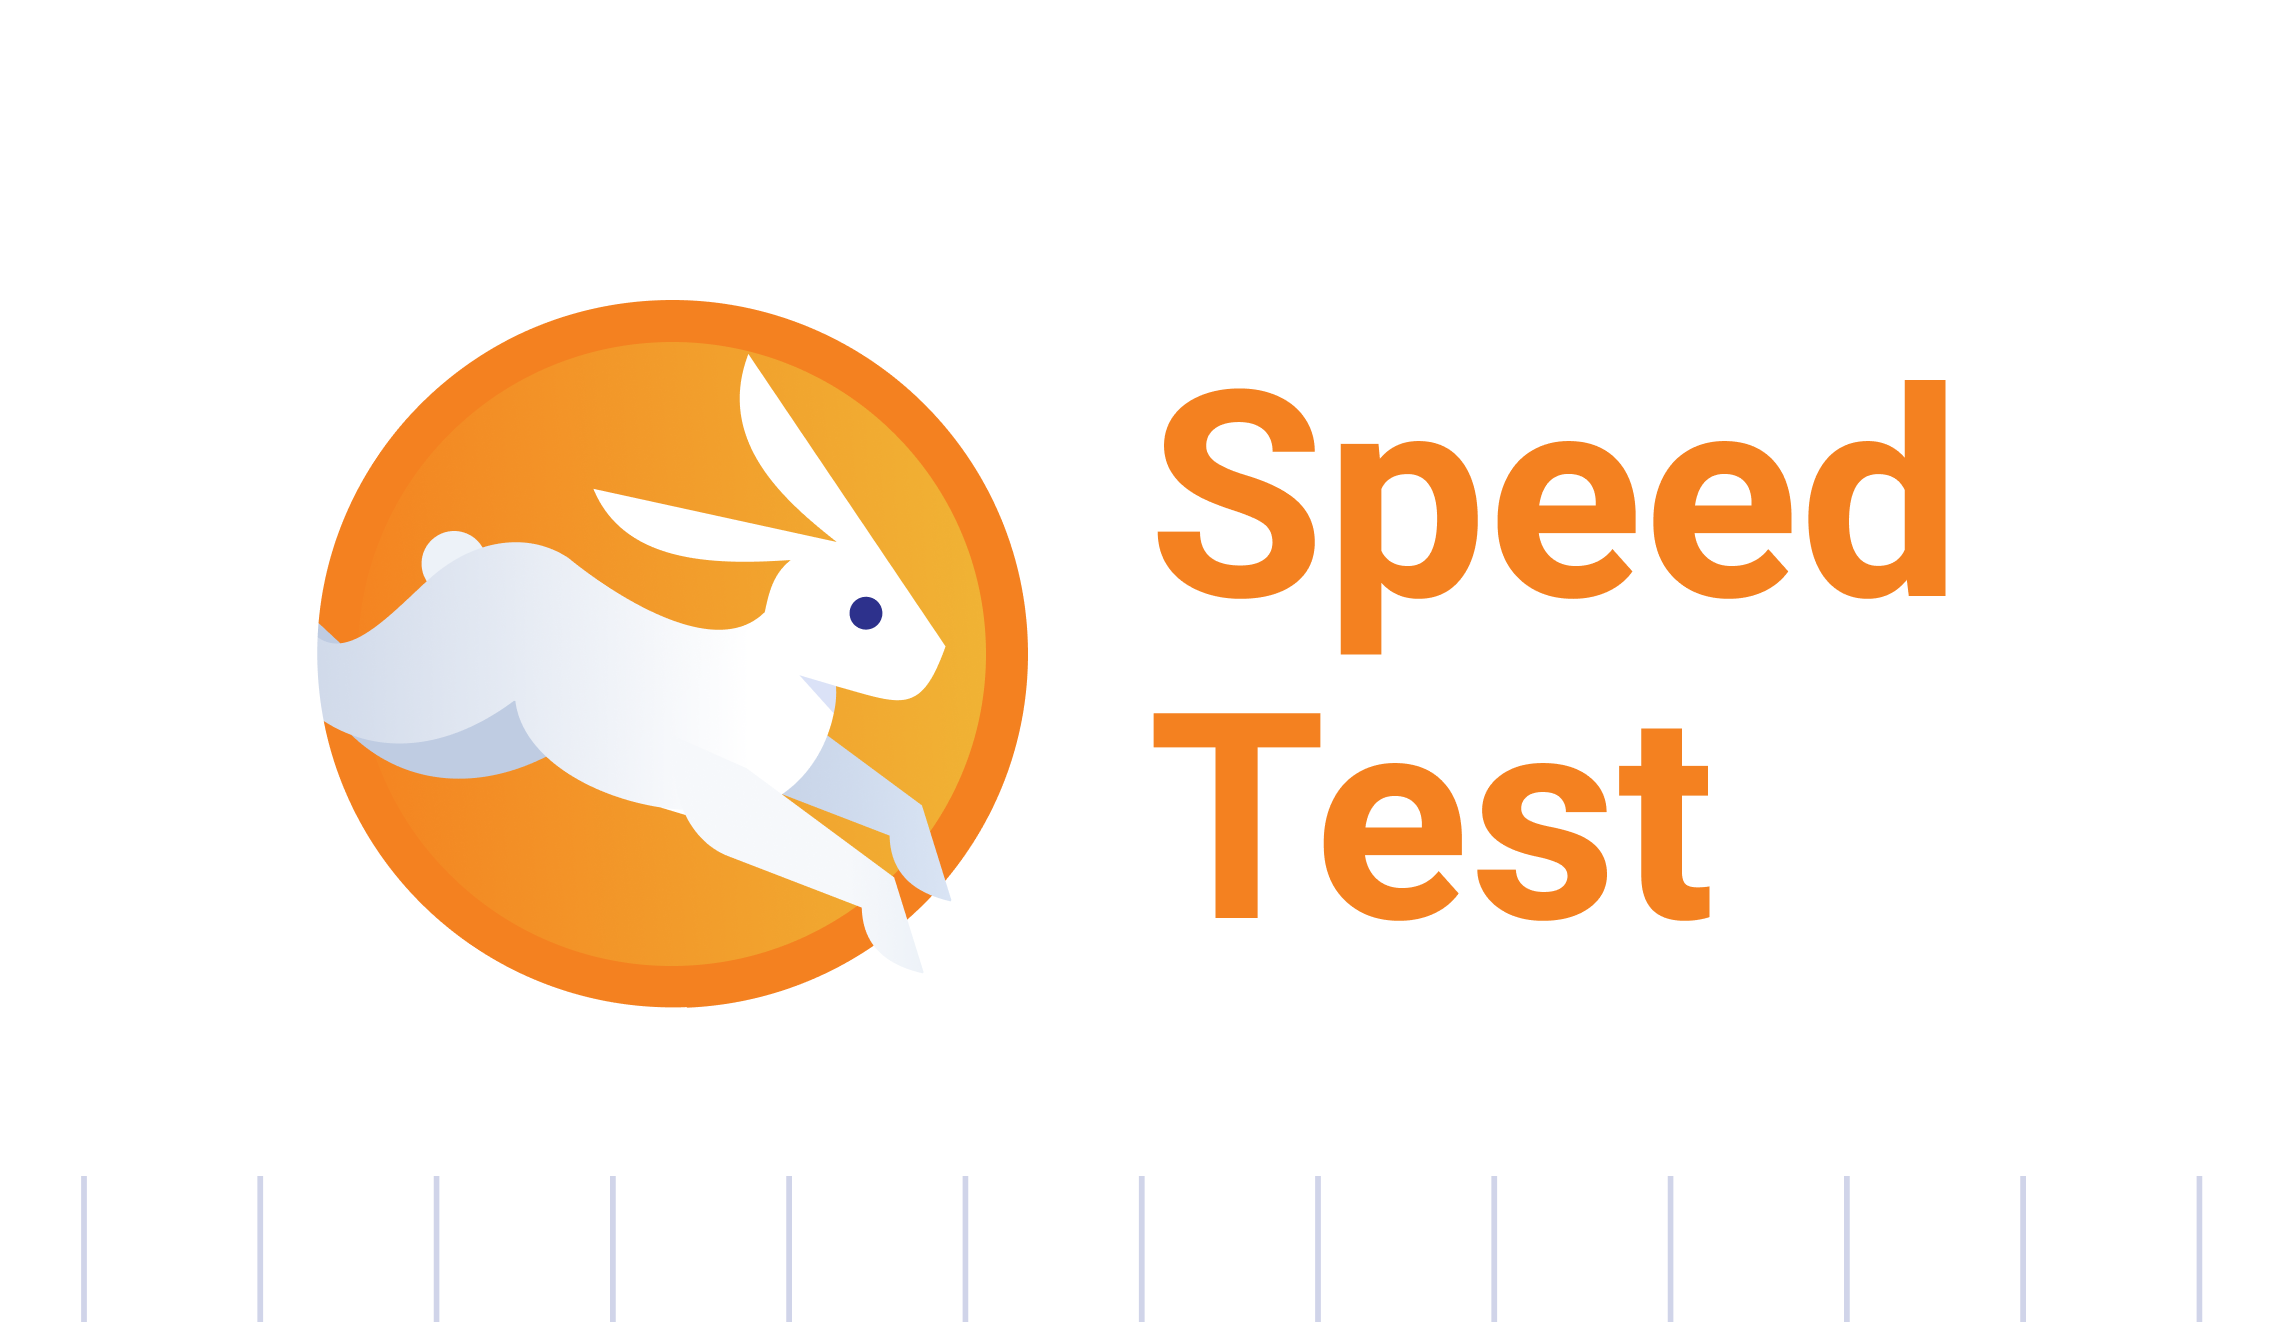 Internet Speed Test - Measure Network Performance | Cloudflare